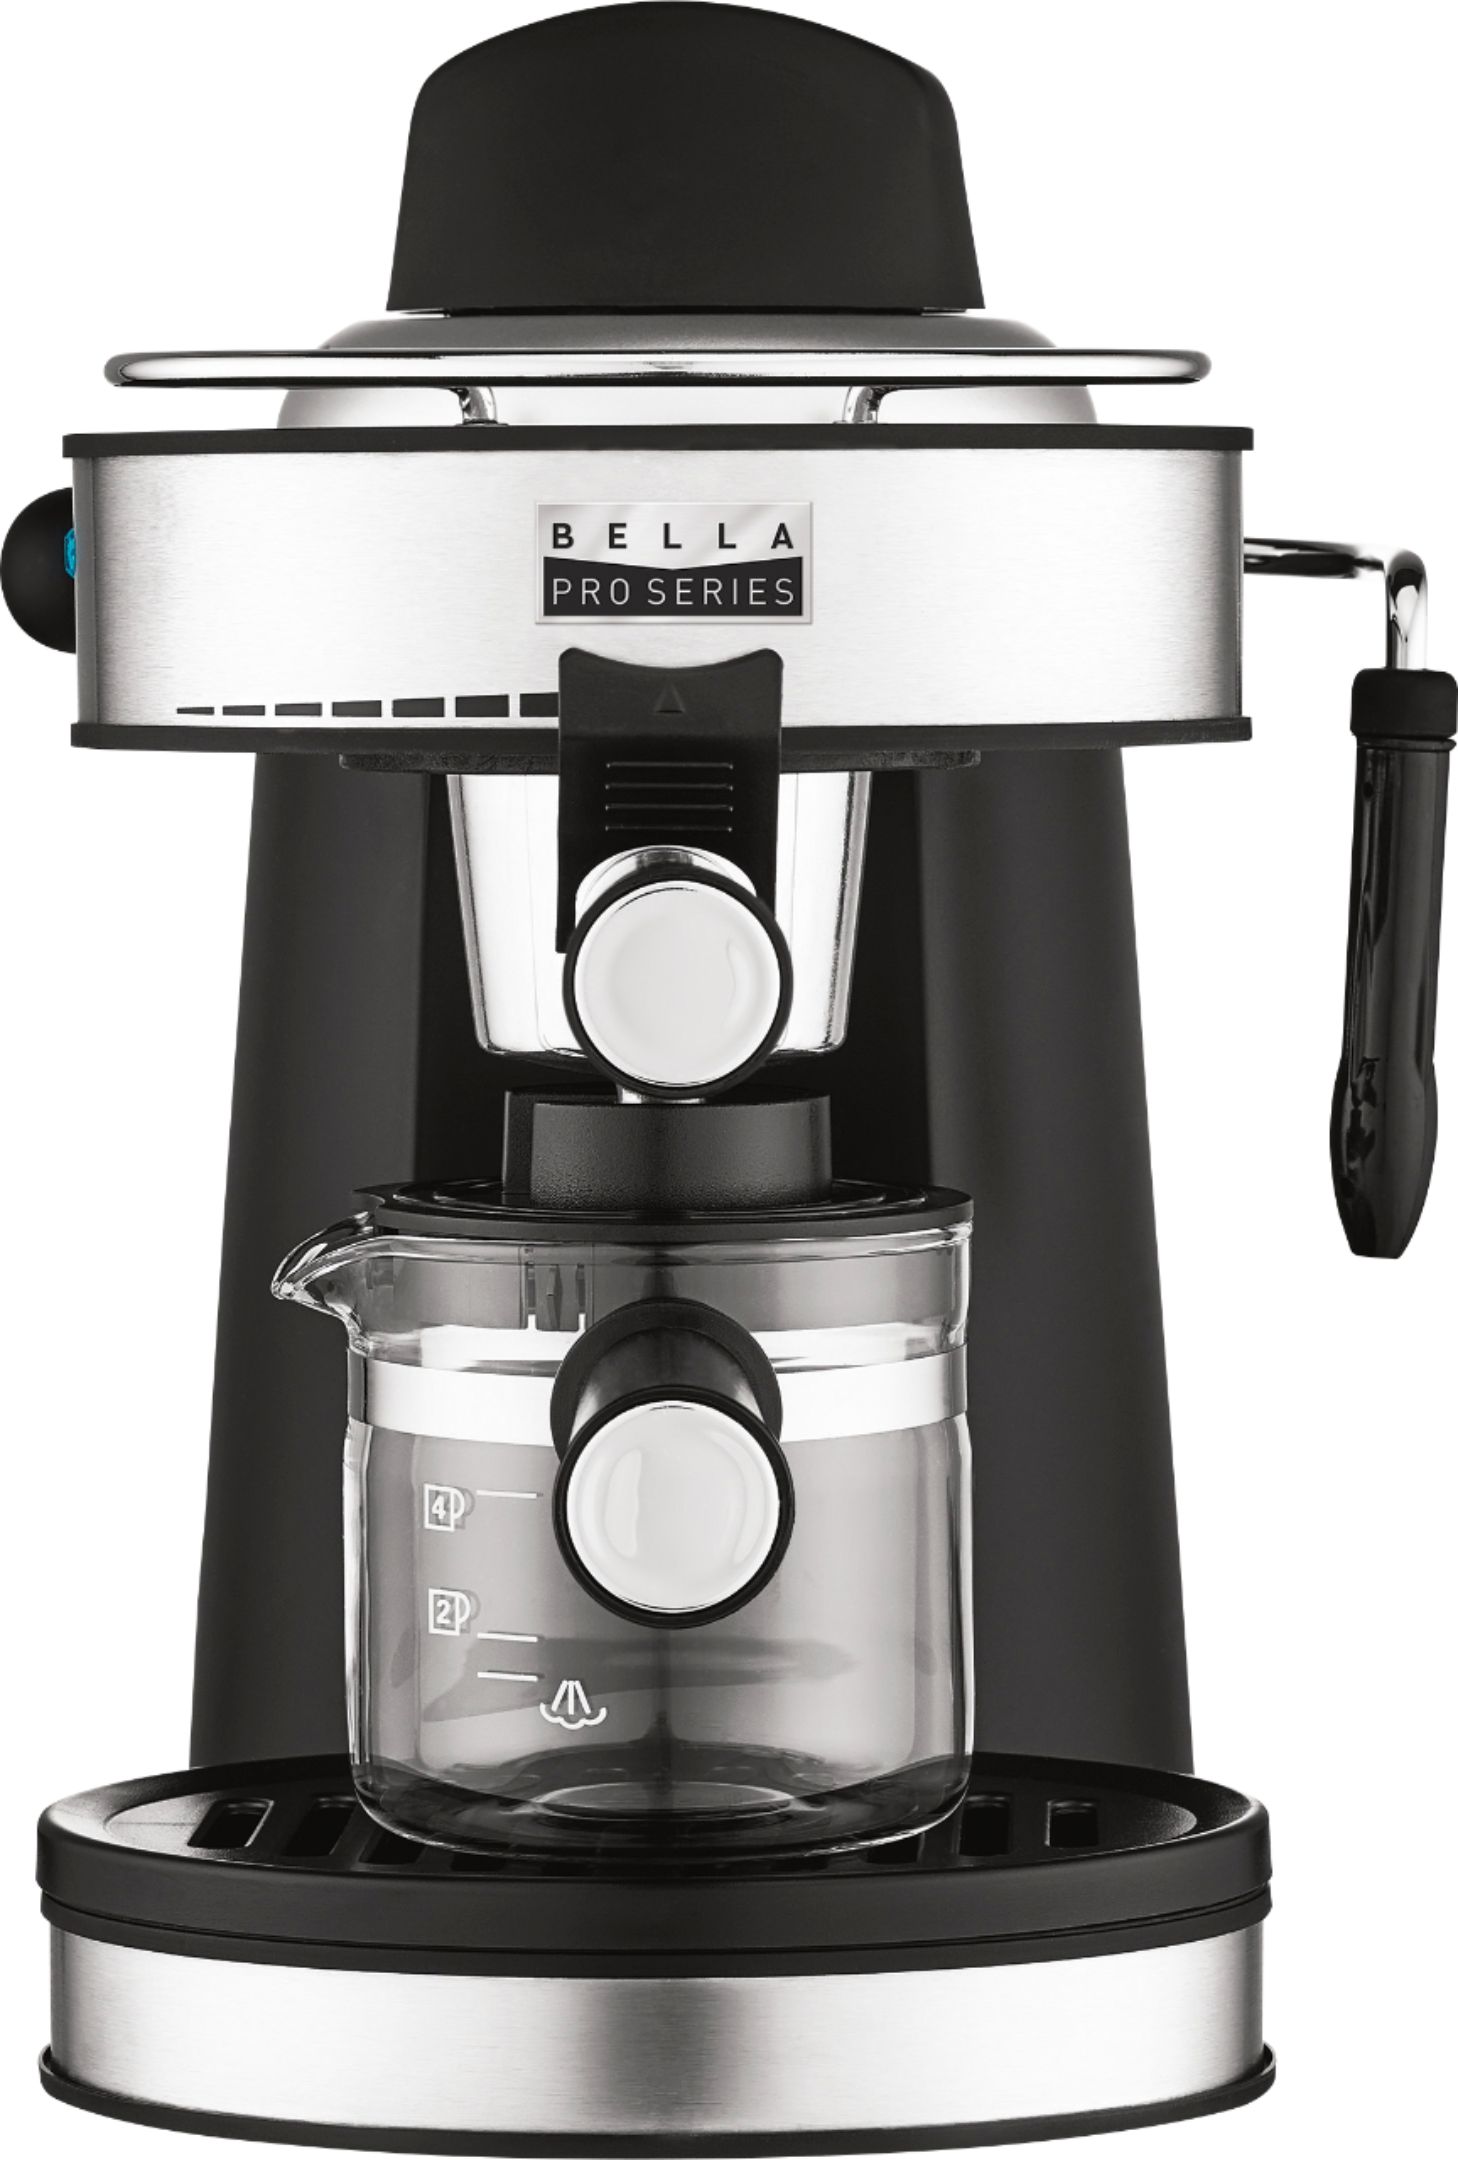 Bella Pro Series – Pro Series Espresso Machine with 5 bars of pressure and Milk Frother – Just $49.99 at Best Buy